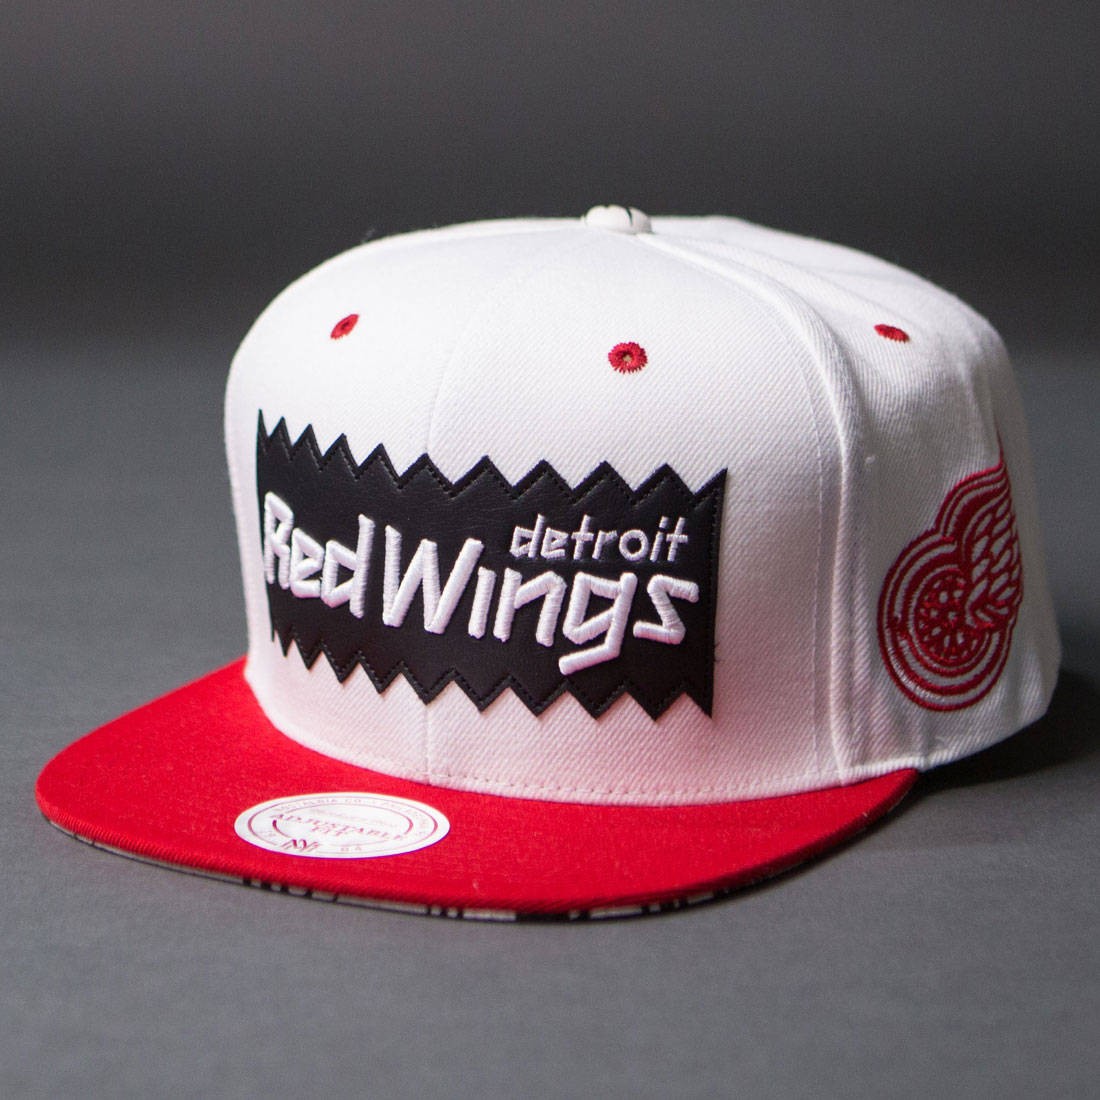 Mitchell & Ness - Transcript Detroit Red Wings Snapback - Red